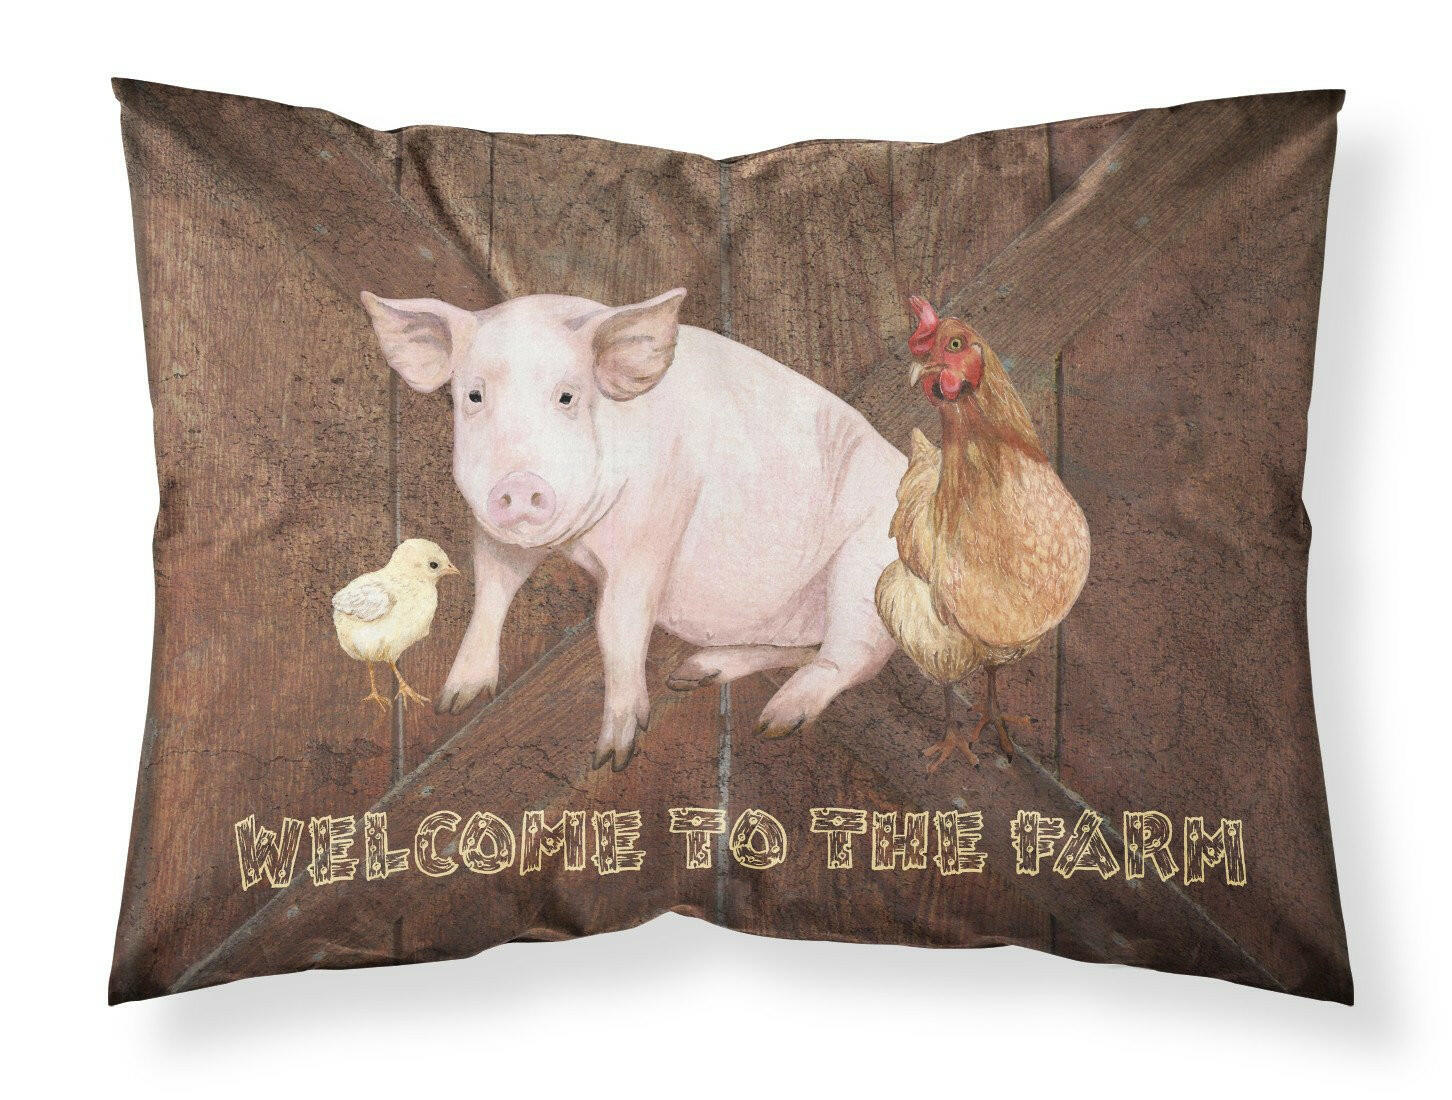 Welcome to the Farm with the pig and chicken Moisture wicking Fabric standard pillowcase SB3083PILLOWCASE by Caroline's Treasures